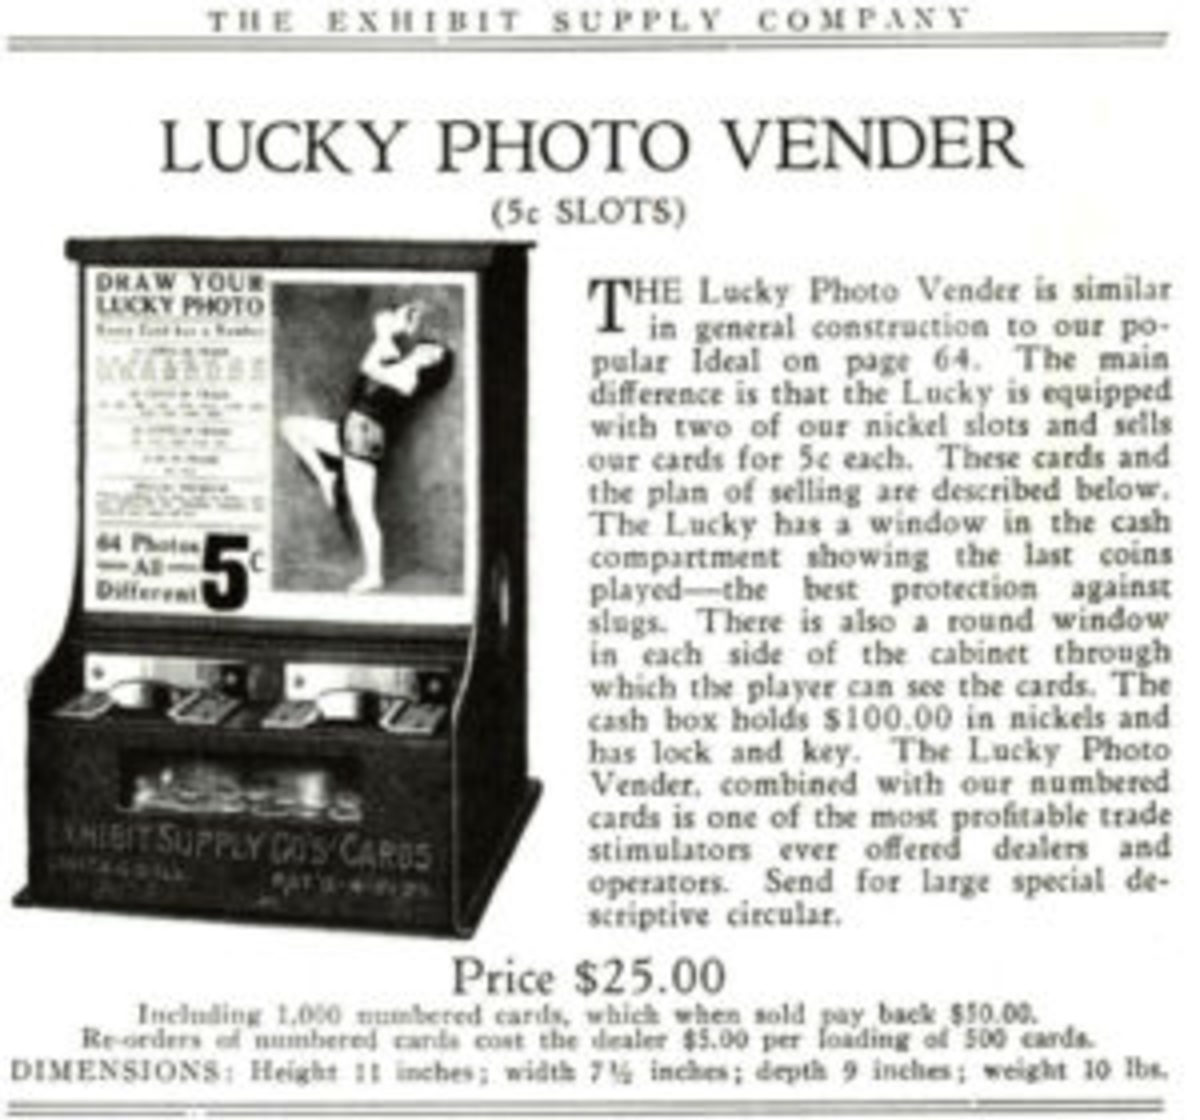  A page from ESCO’s 1930 catalog describe the card vending machines and the potential profit to arcade operators. Prizes and coupons skirted the issue of gambling. (Photos Adam Warshaw.)